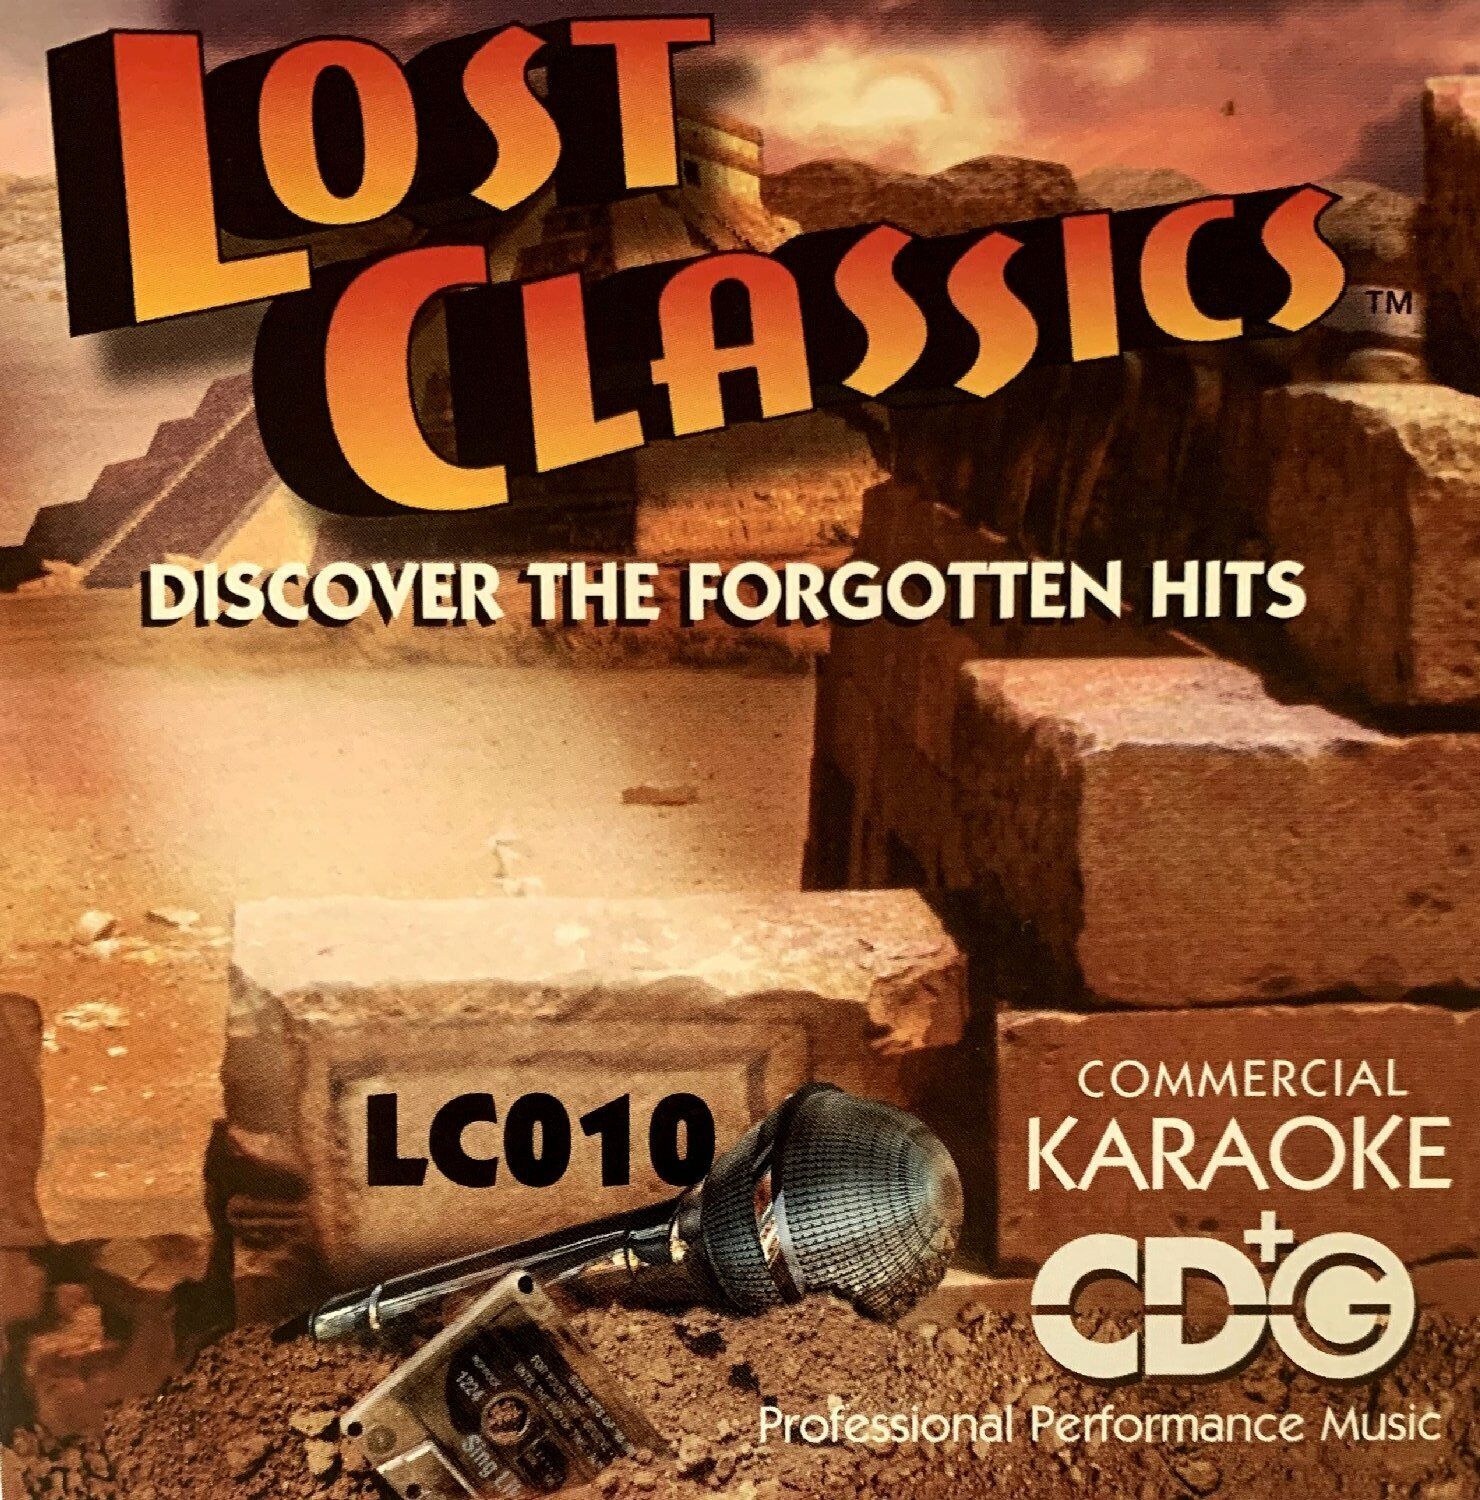 PRIDDIS KARAOKE - LOST CLASSICS - HARD TO FIND SONGS 60'S - 80'S